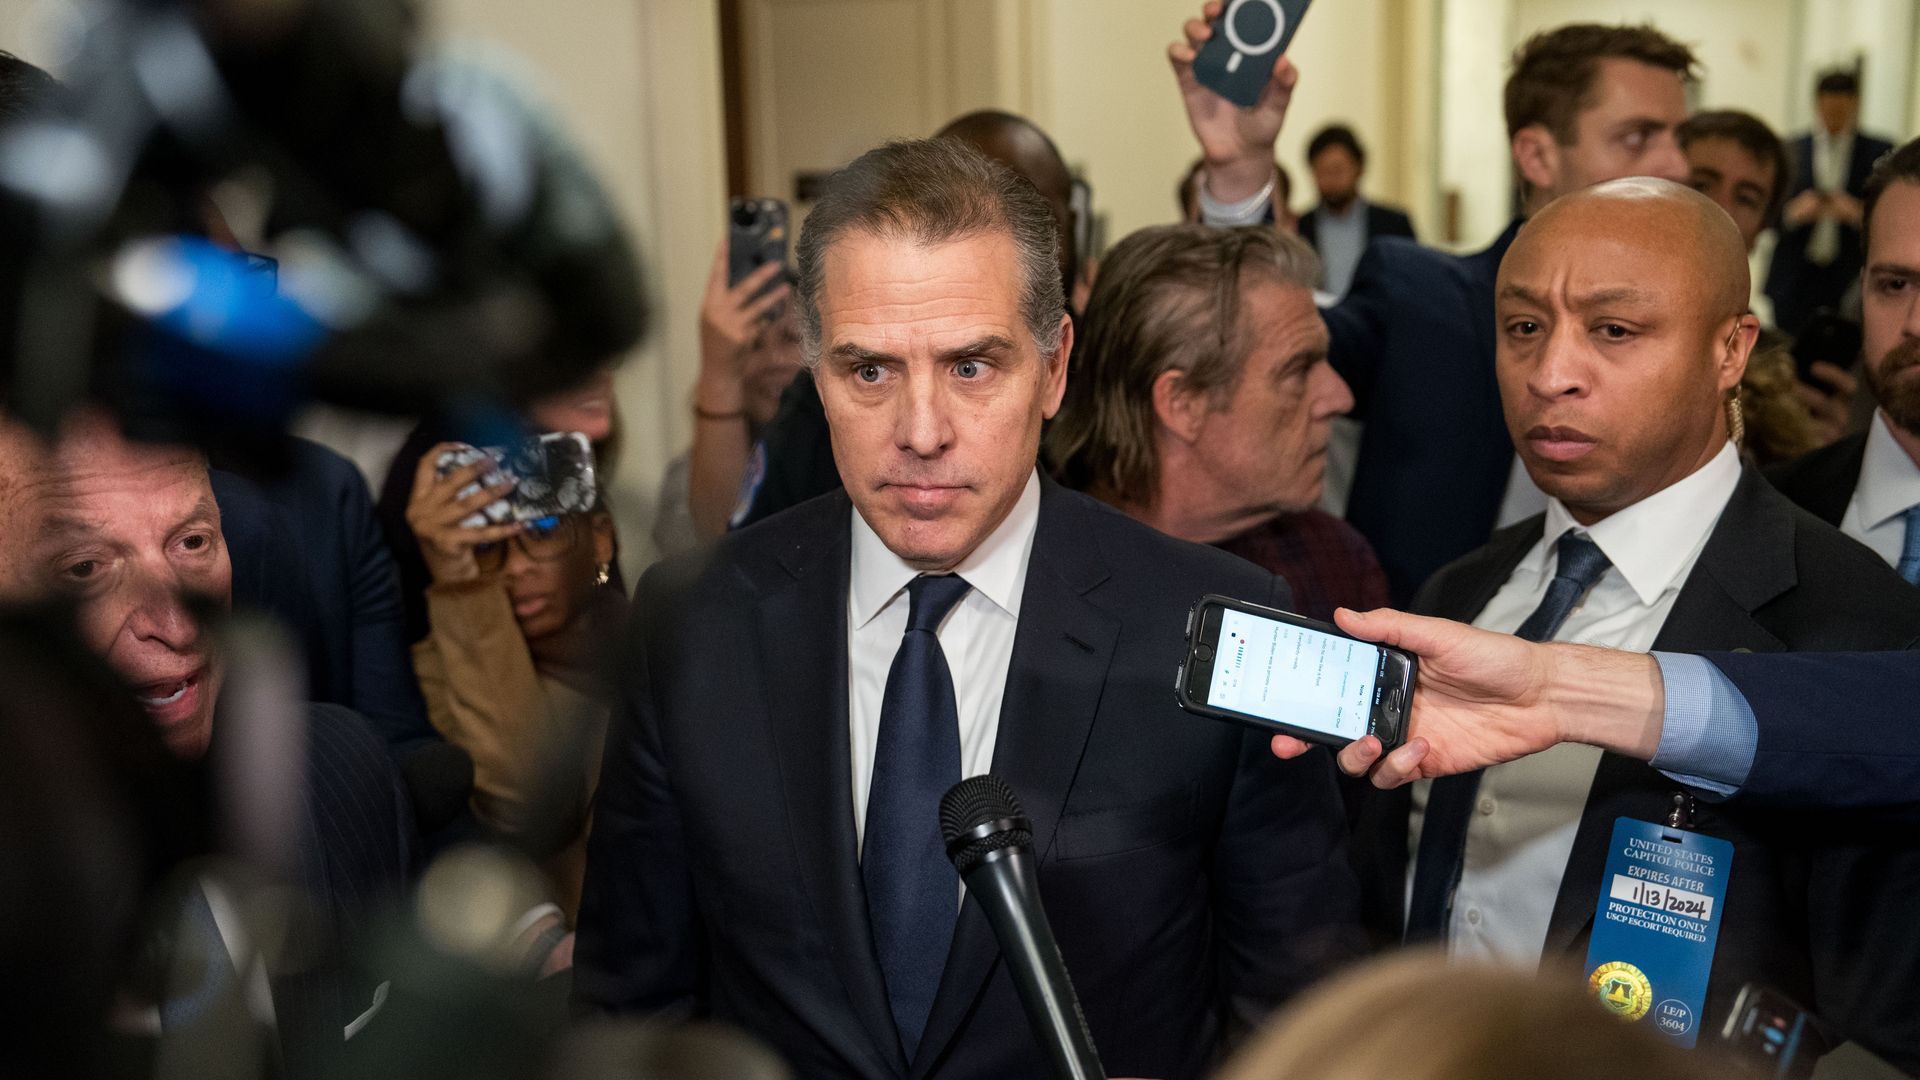 Hunter Biden walks a congressional hall as several people surround him, extending cameras and microphones into his face. 